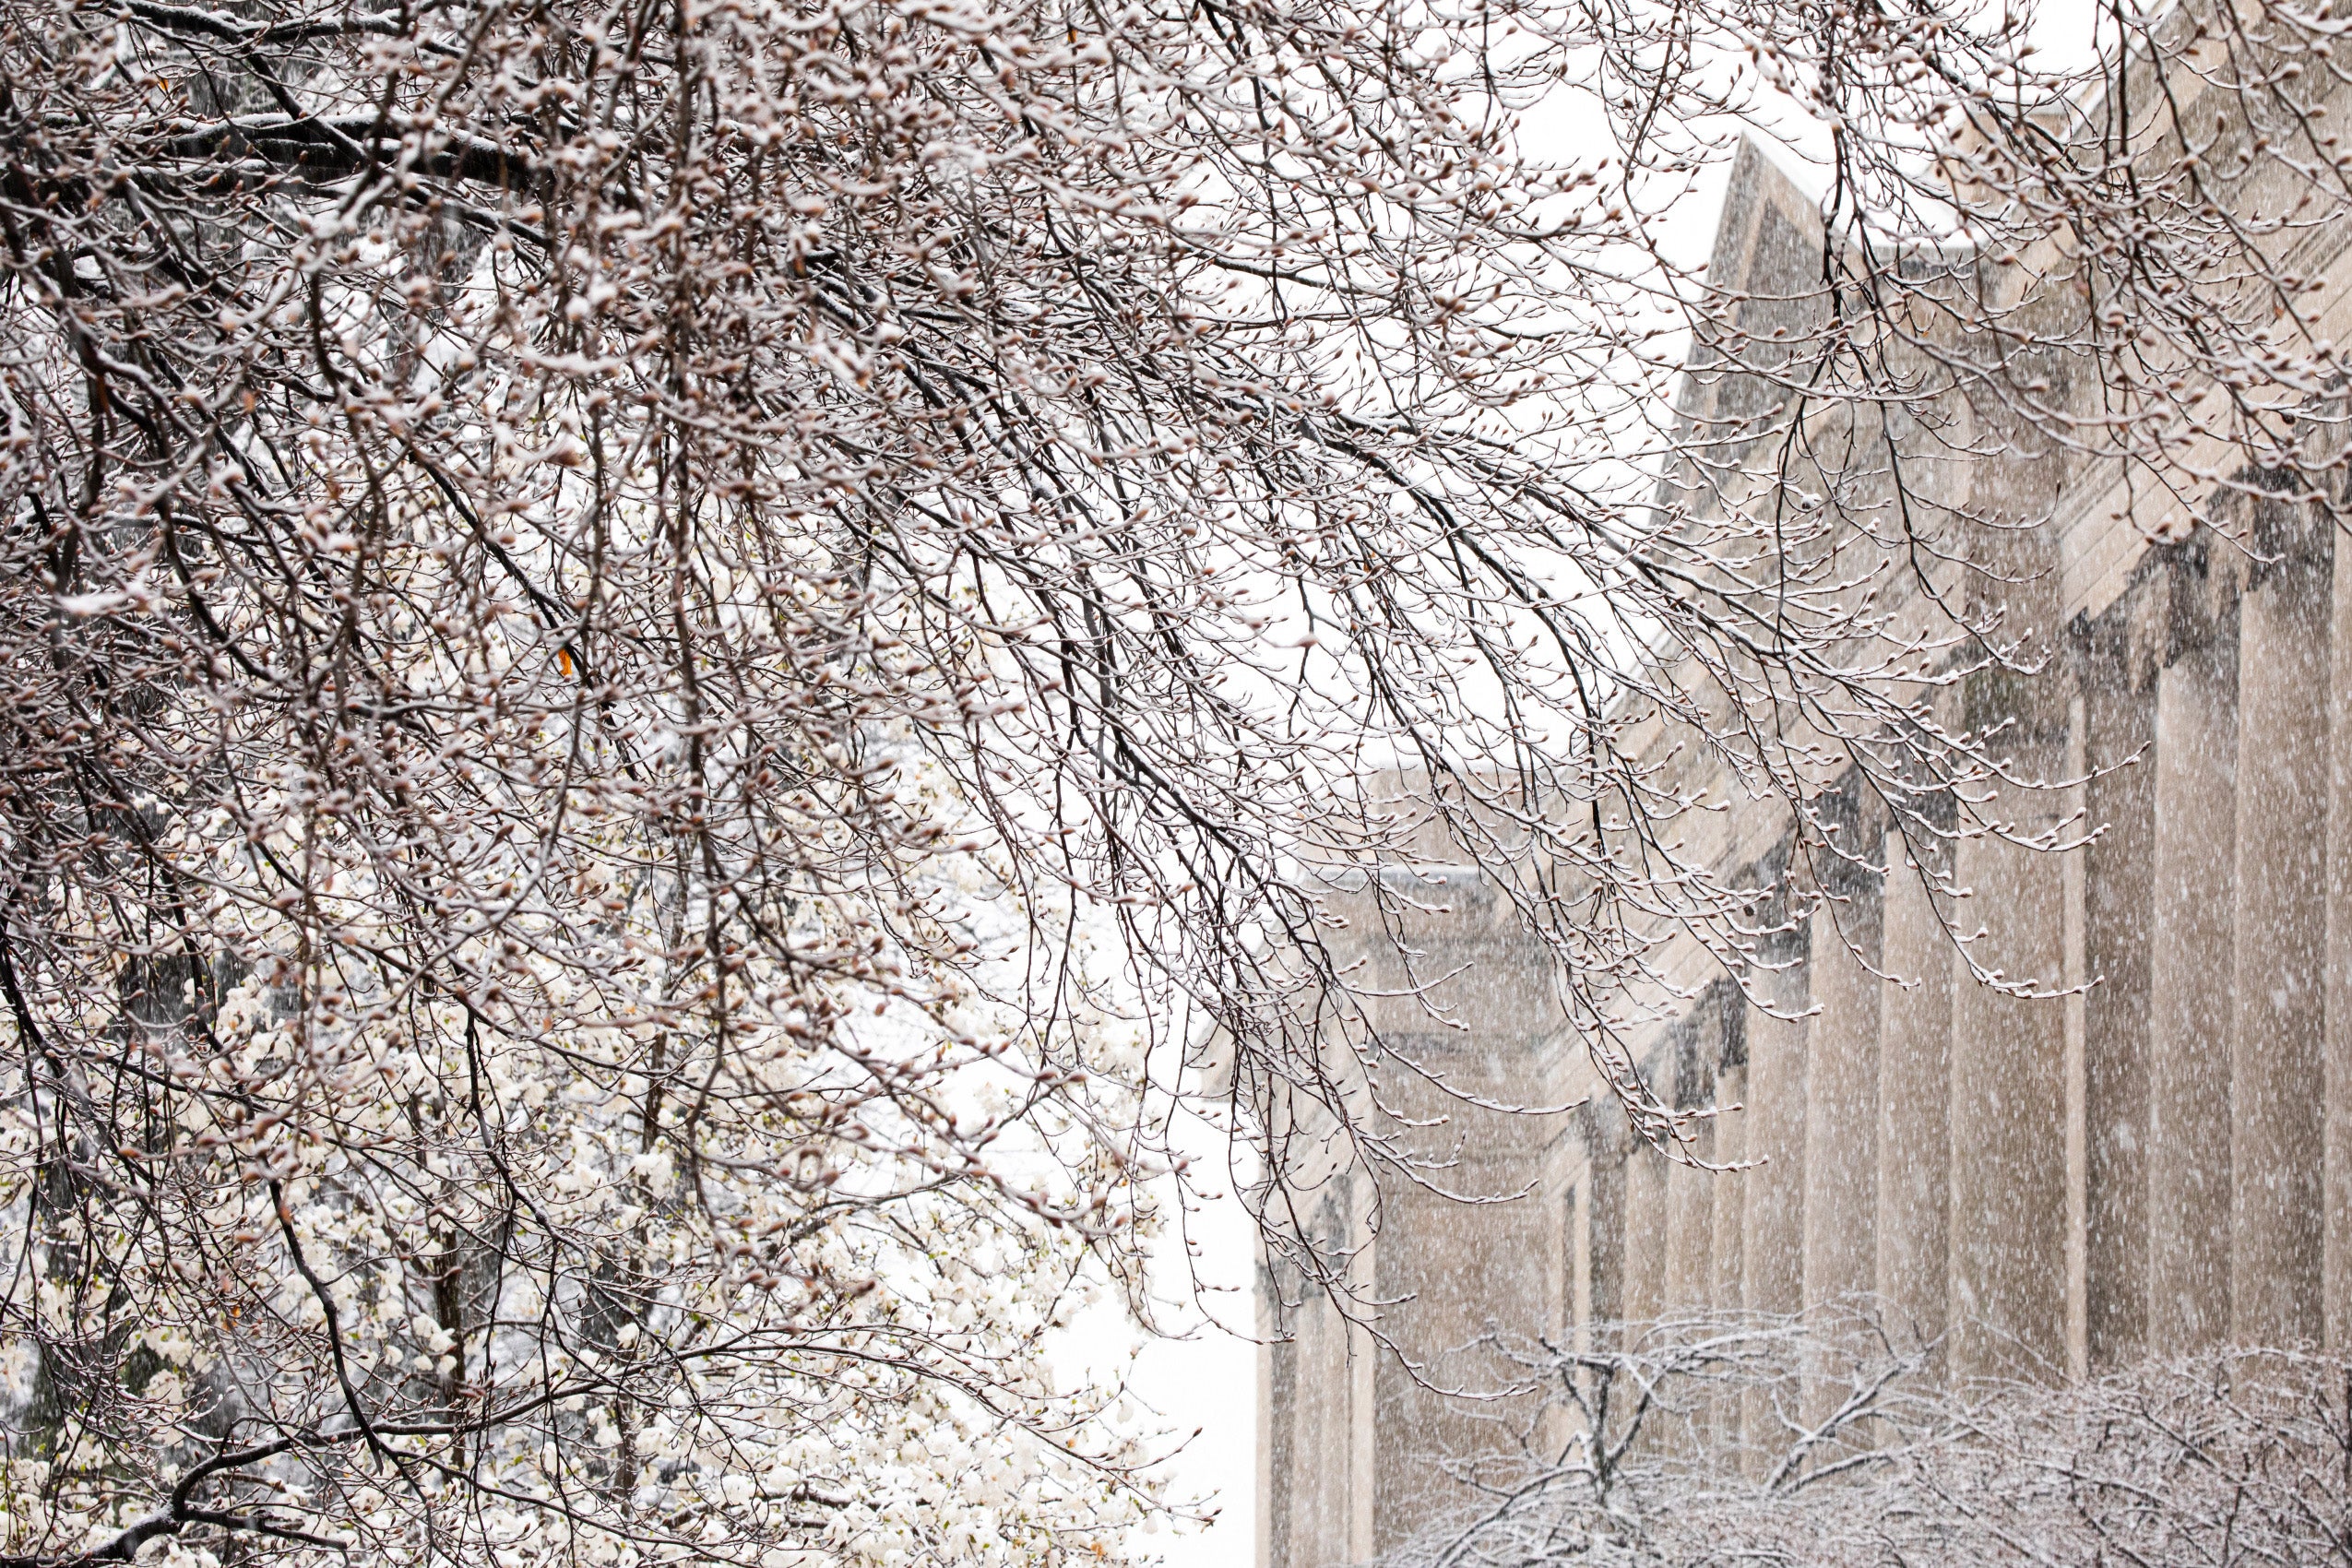 Snow covered tree branches and building with columns